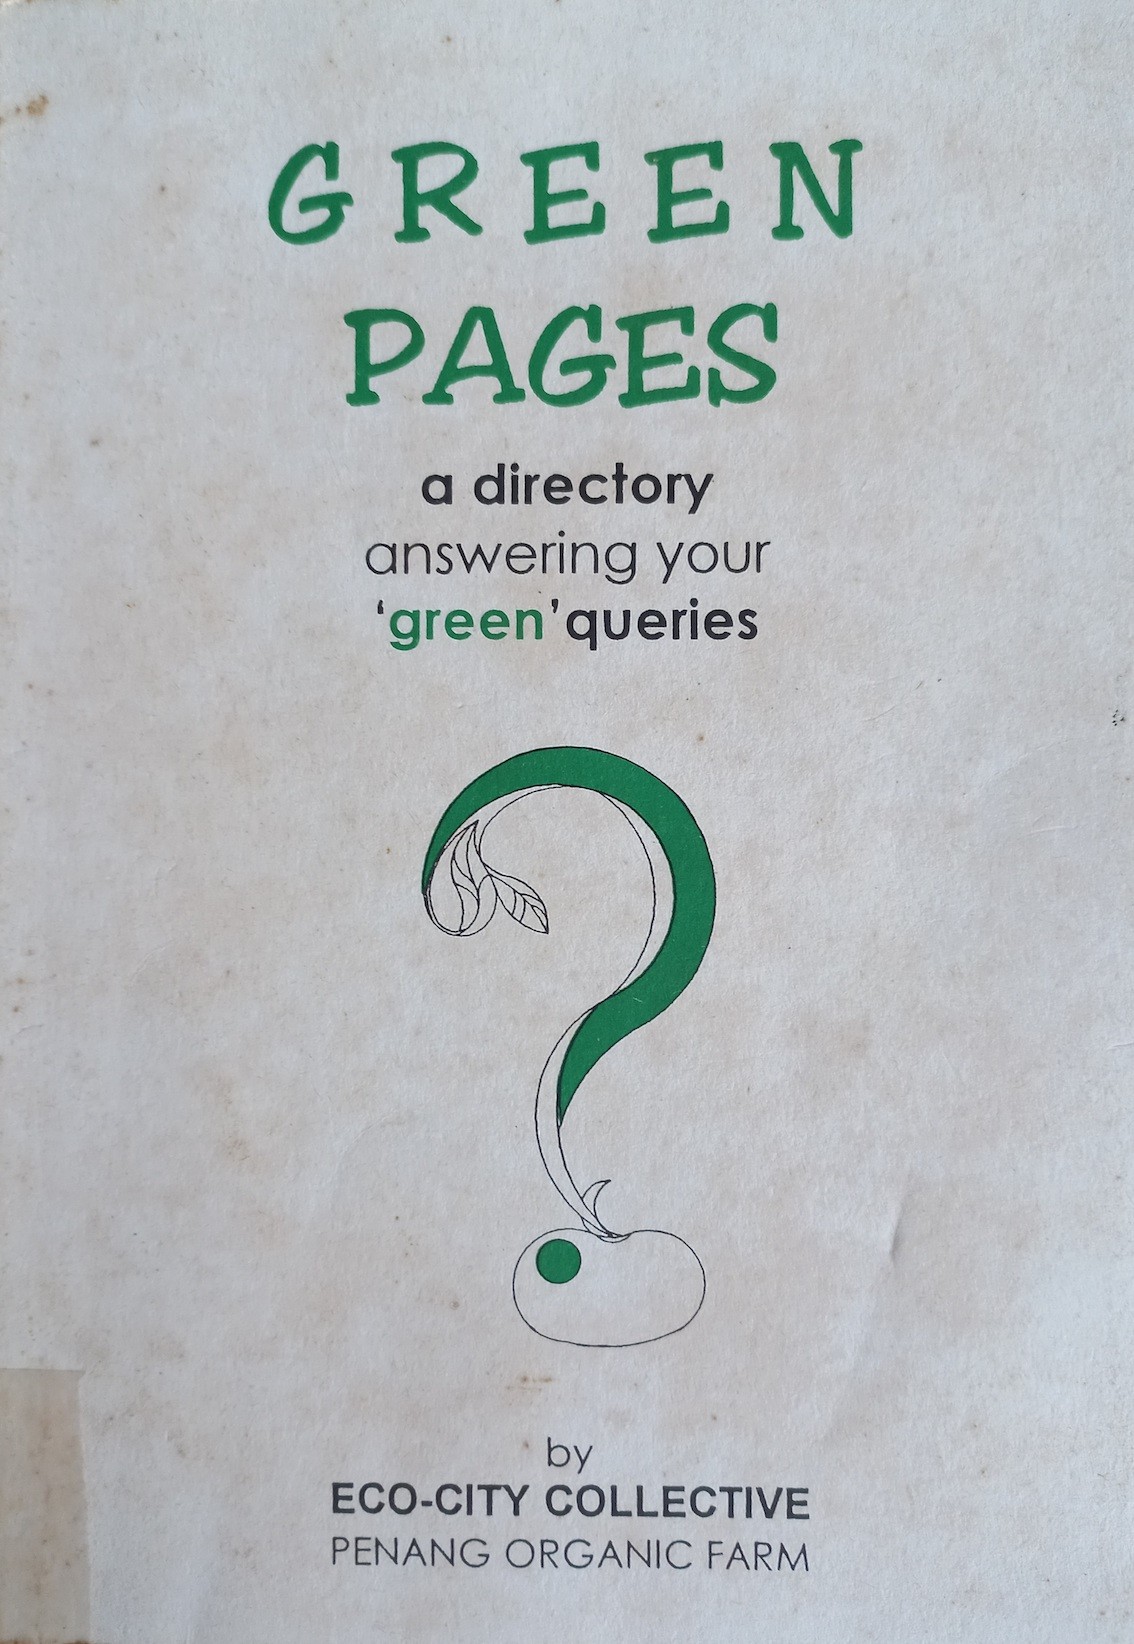 Green Pages: a directory answering your 'green' queries